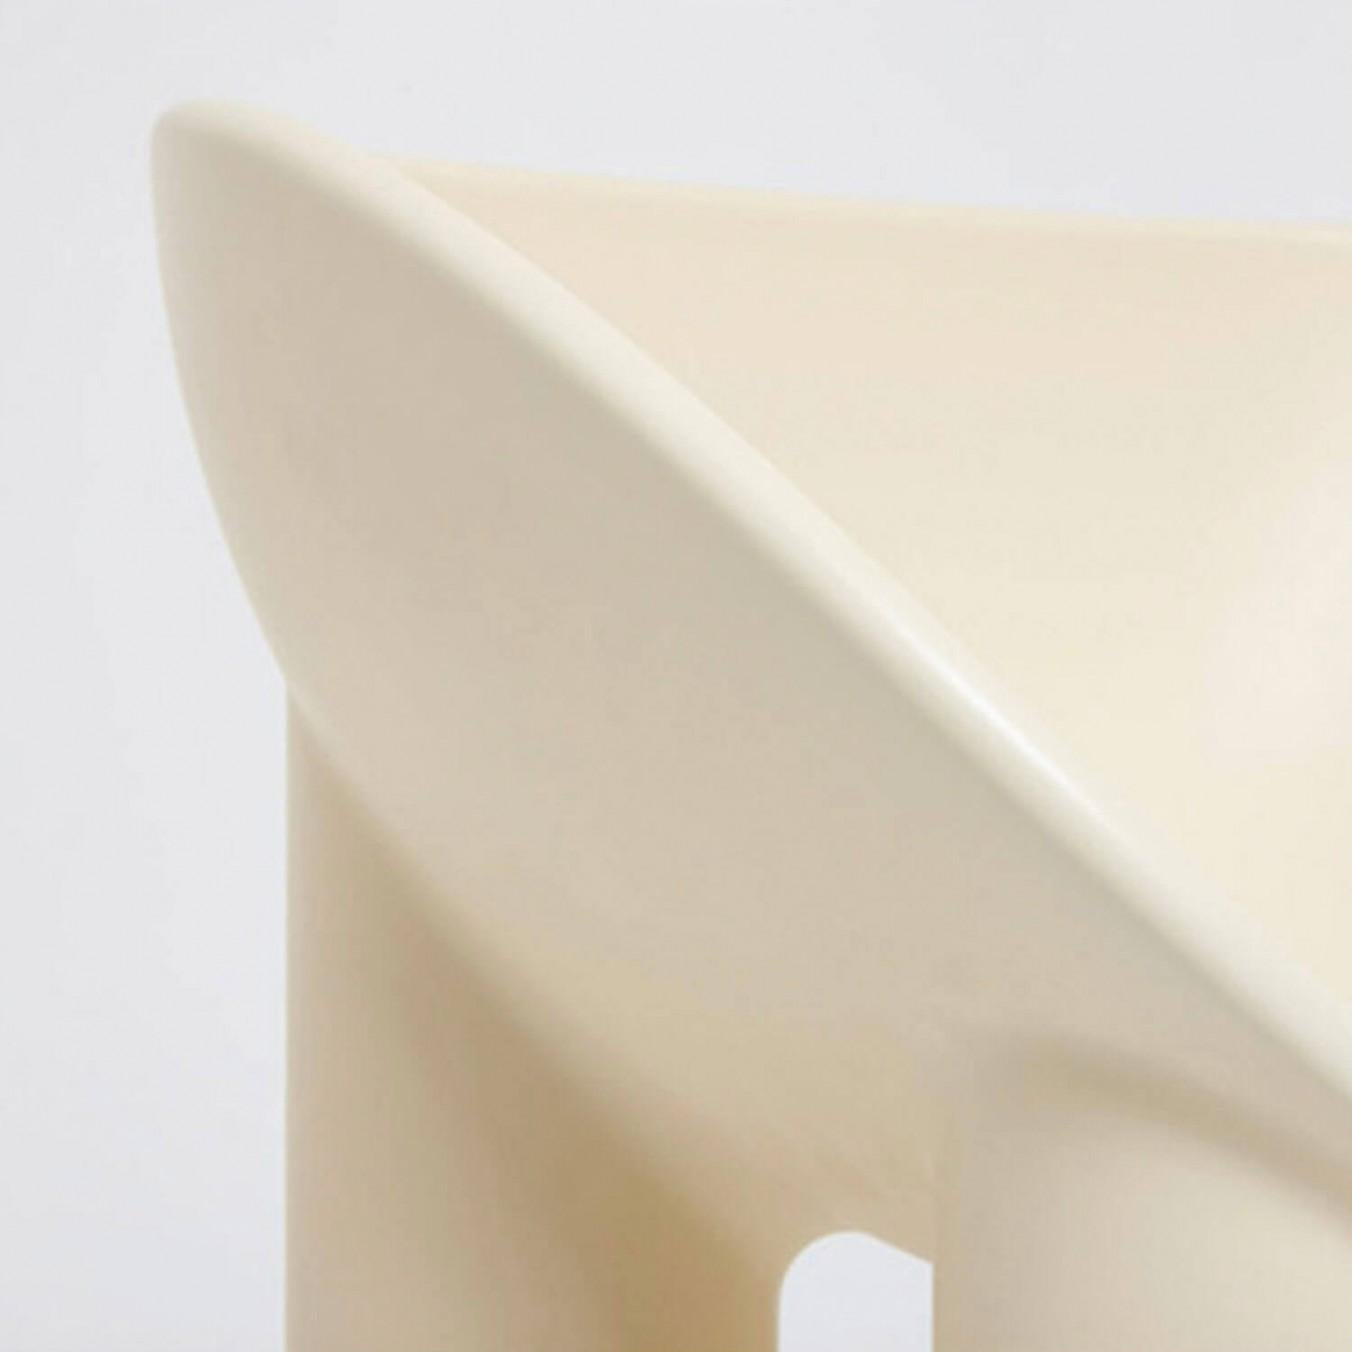 Contemporary fiberglass chair - Roly Poly chair by Faye Toogood. This is shown in the cream fiberglass finish. 
Design: Faye Toogood
Material: Fiberglass 
Available also in raw or charcoal finish

The Roly Poly chair is the anchor piece of Faye